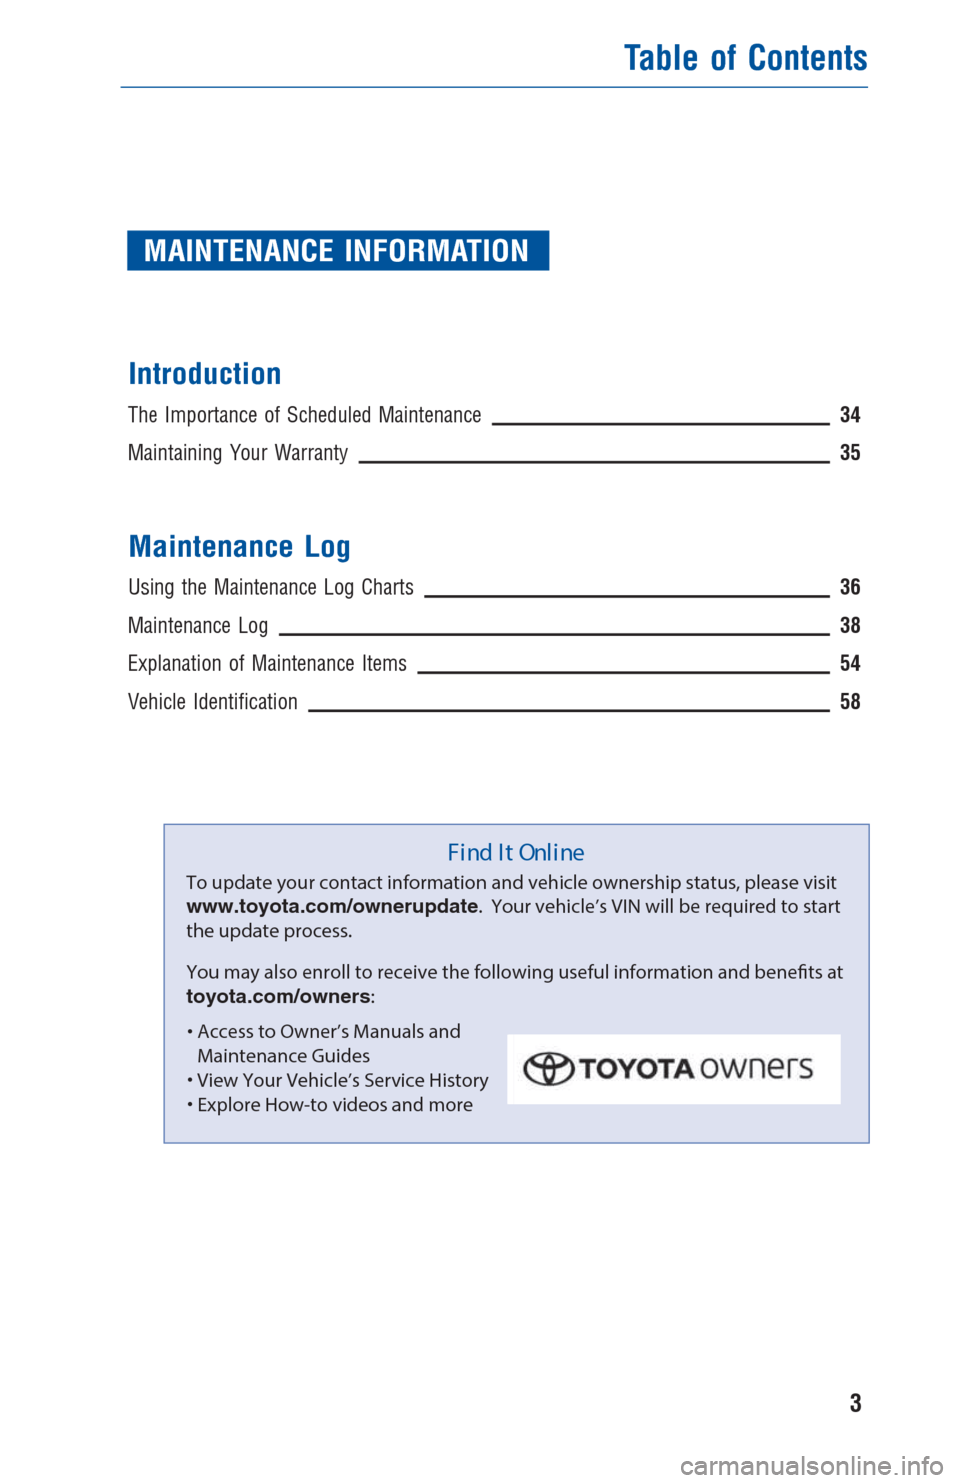 TOYOTA COROLLA 2017 11.G Warranty And Maintenance Guide MAINTENANCE INFORMATION
Introduction
The Importance of Scheduled Maintenance34
Maintaining Your Warranty35
Maintenance Log
Using the Maintenance Log Charts36
Maintenance Log38
Explanation of Maintenan